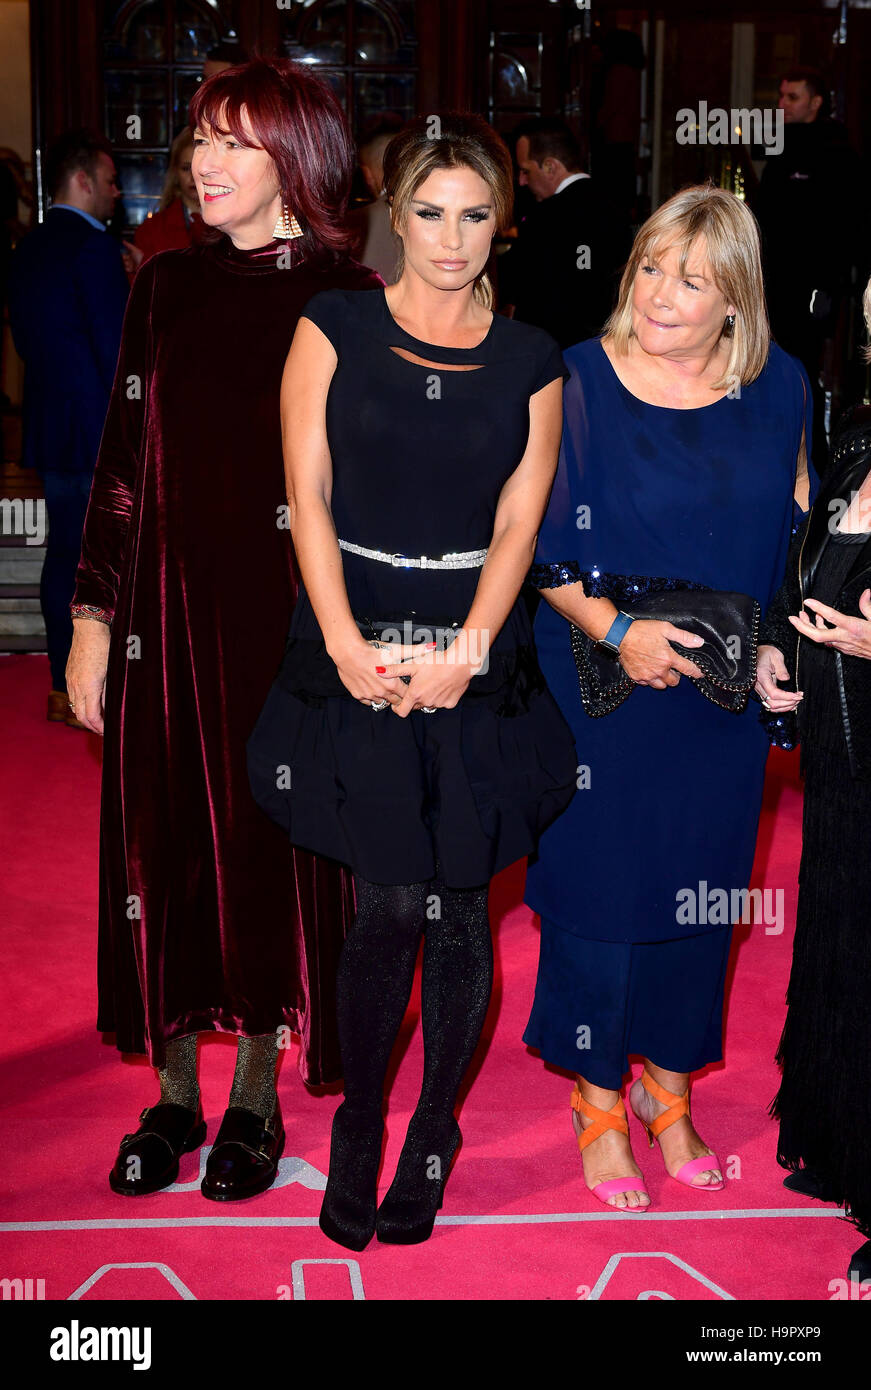 Janet Street Porter, Katie Price and Linda Robson attending the ITV Gala at the London Palladium. Stock Photo